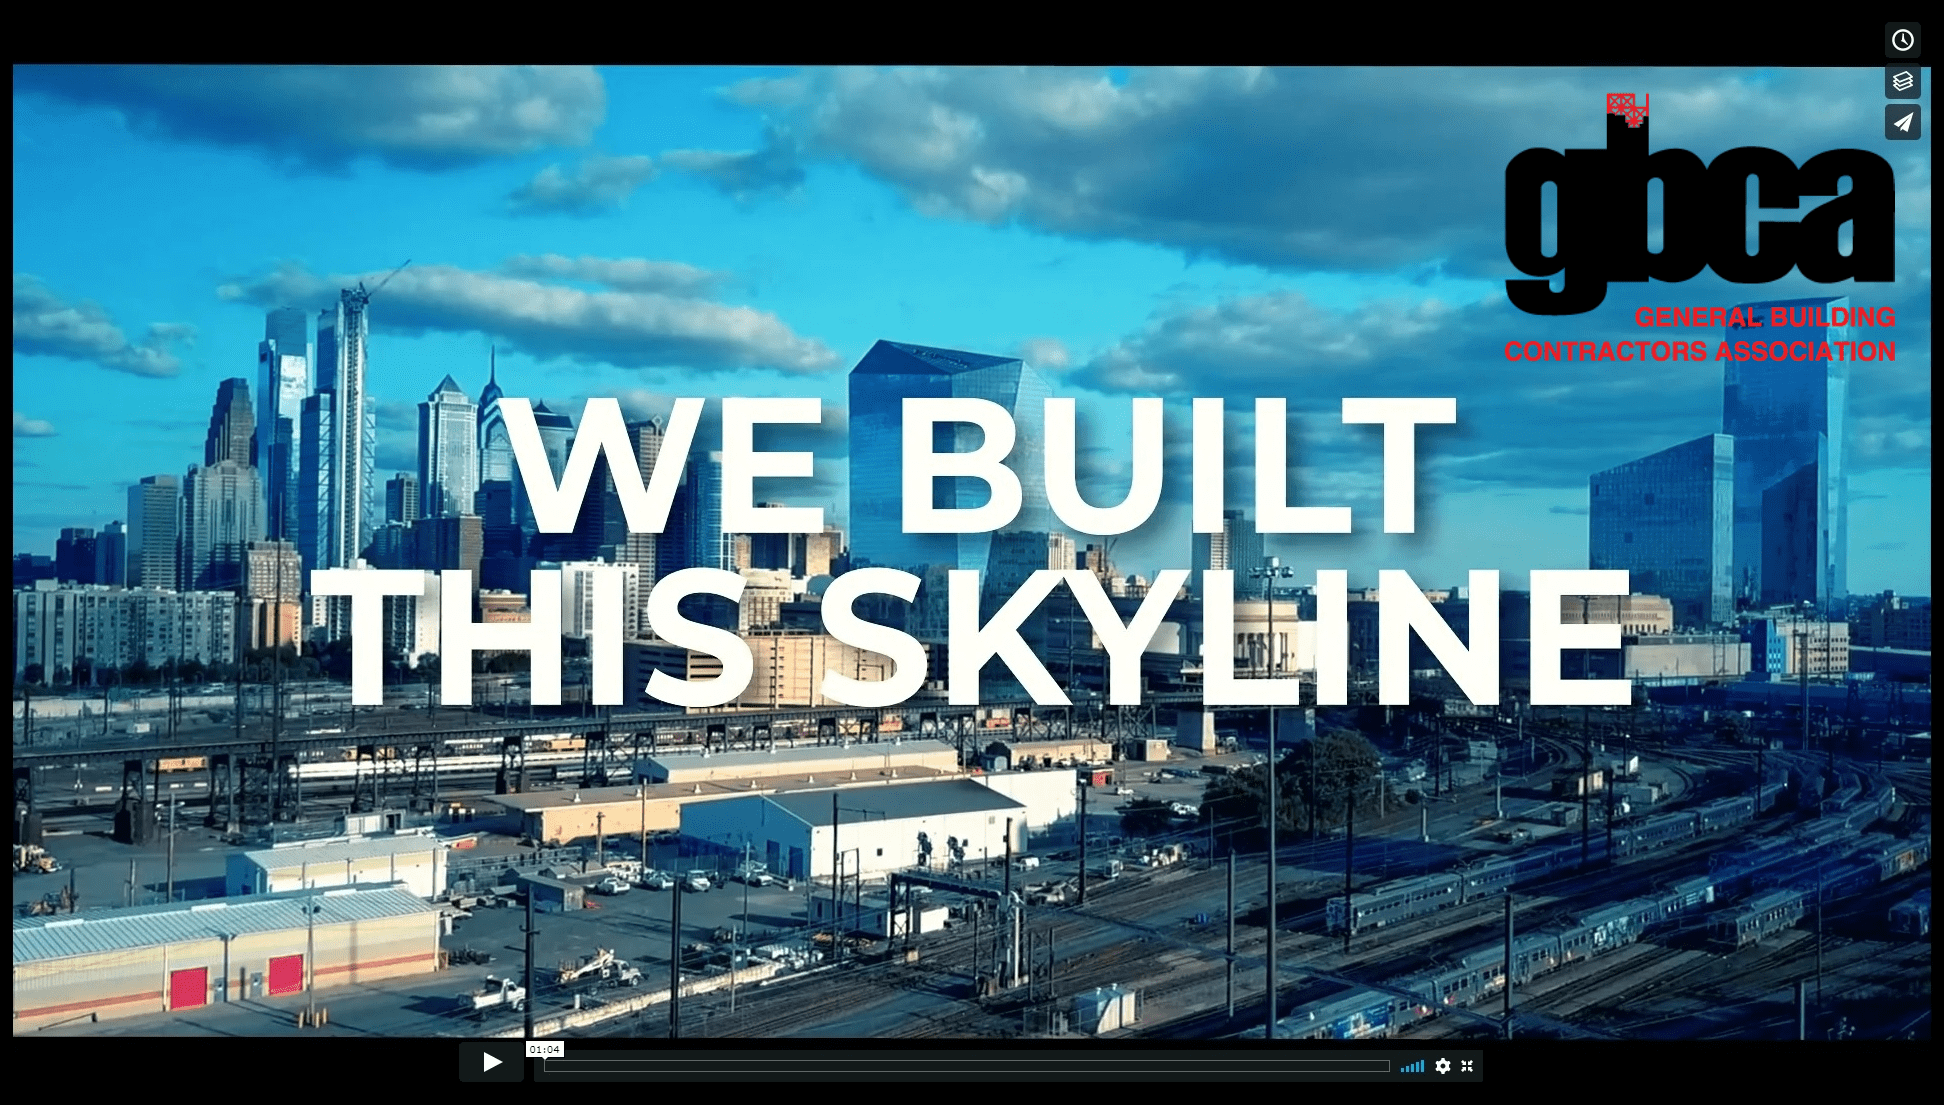 We Built This Skyline - Logo - https://s39939.pcdn.co/wp-content/uploads/2020/08/Visual-Storytelling_General-Building-Contractors-Association.png